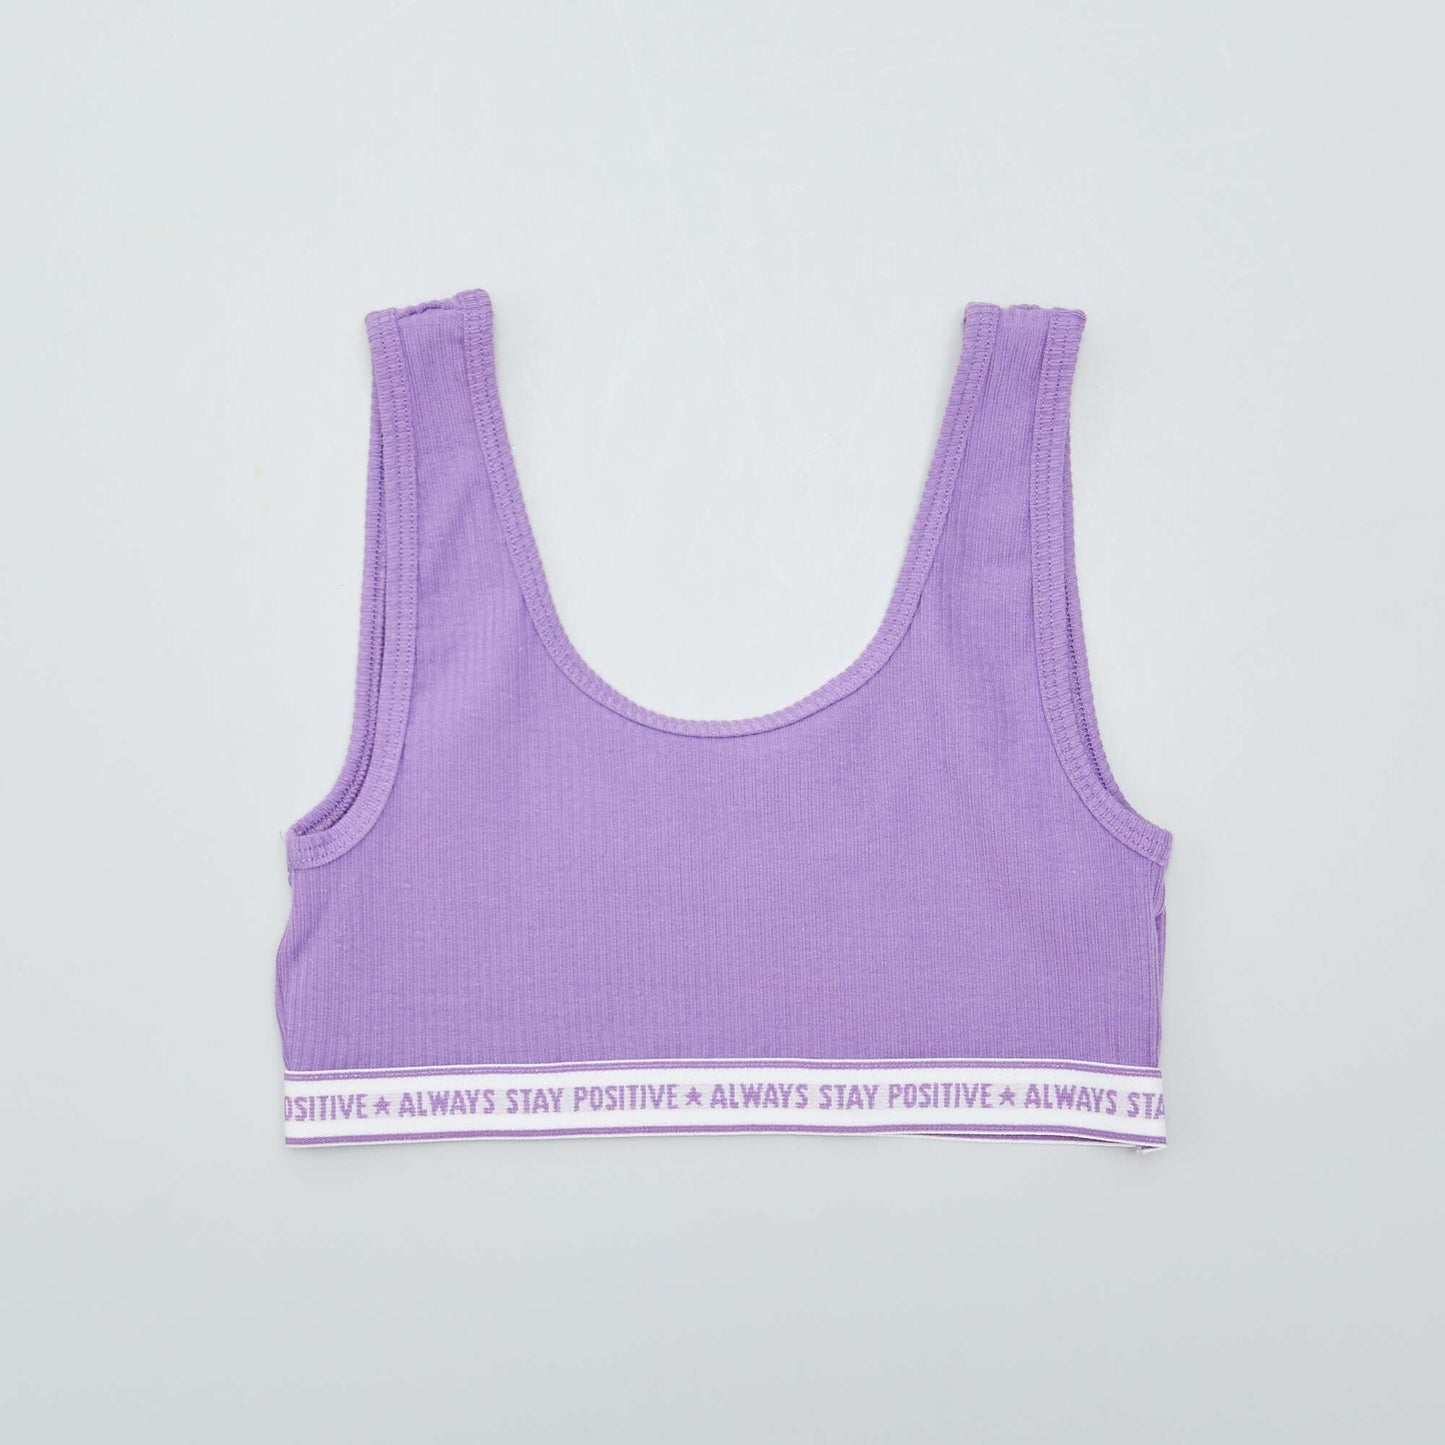 Pack of 2 ribbed sports bras PURPLE